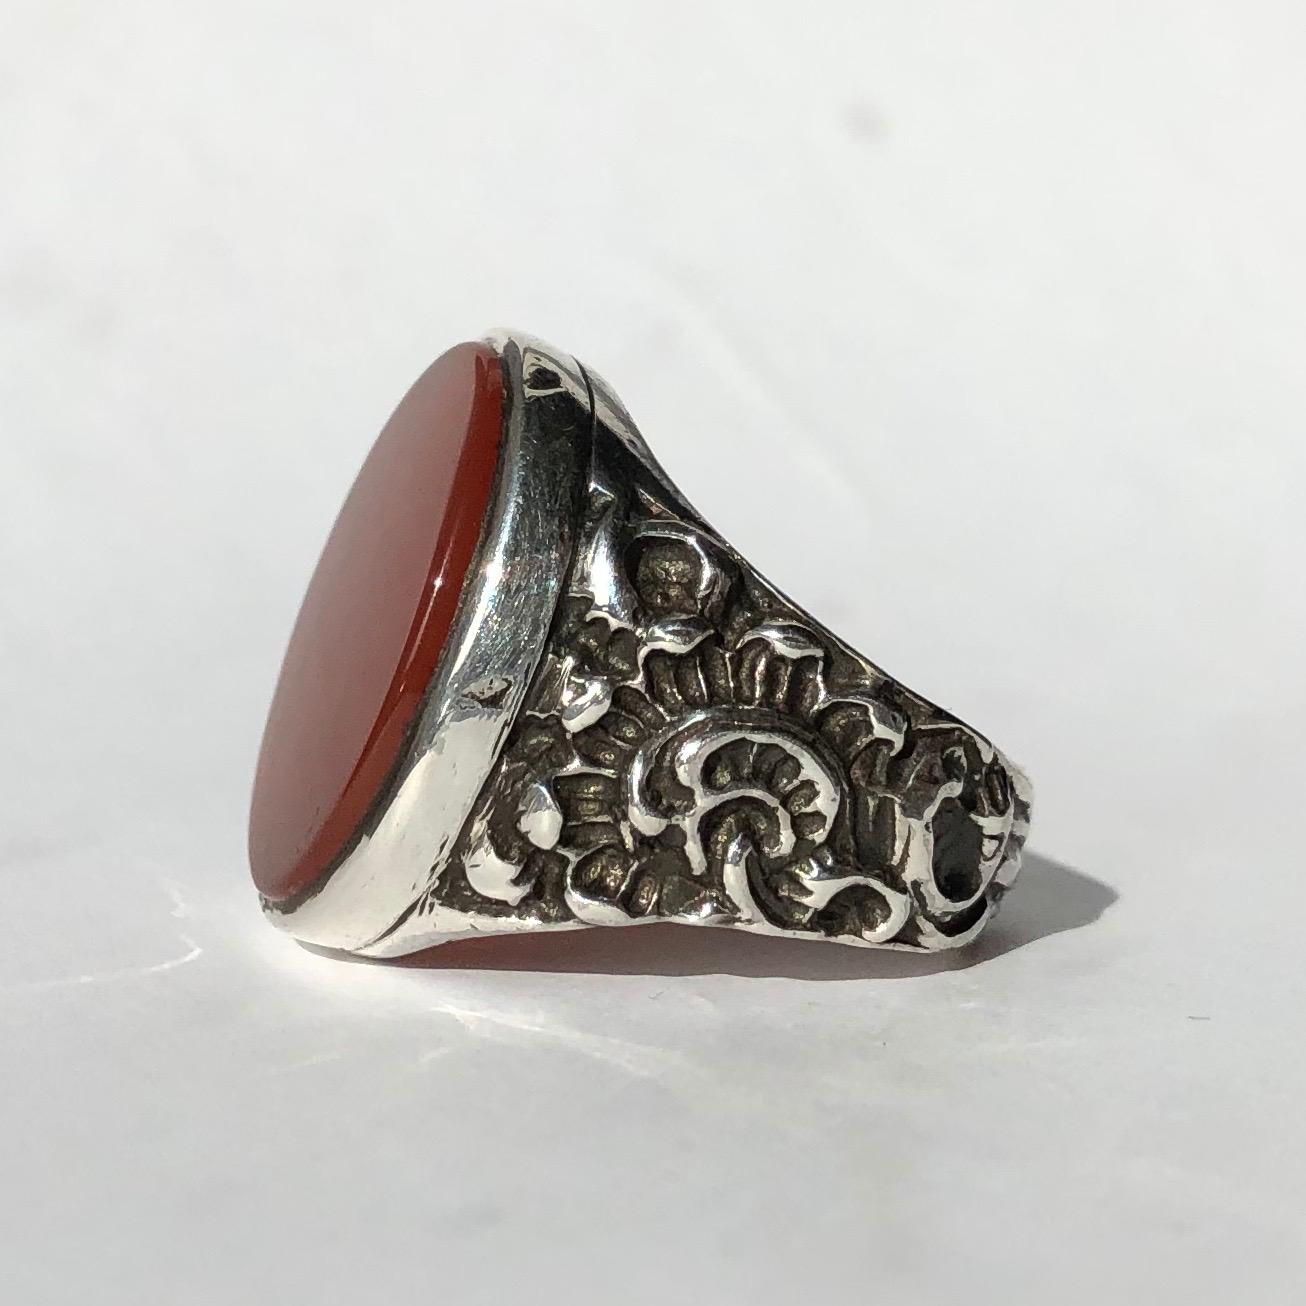 The chunkiness of the moulded silver and the large carnelian stone are a great match! The stone is set within a frame of silver and the shoulders have a floral design moulded into them. 

Ring Size: R 1/2 or 8 3/4
Stone Dimensions: 19x15mm

Weight: